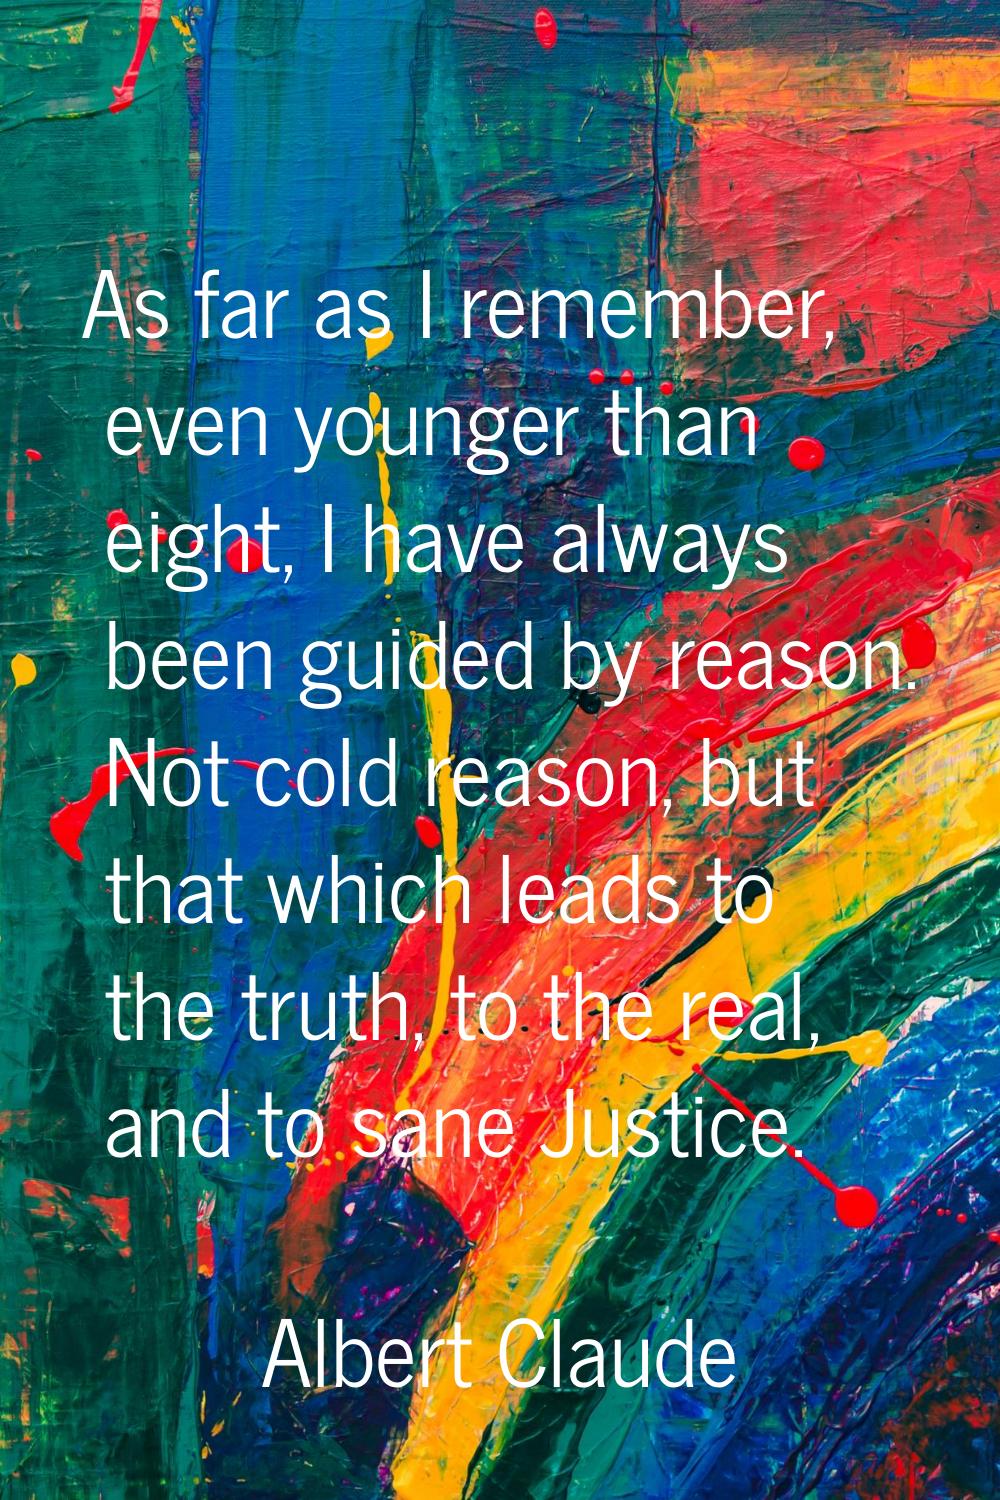 As far as I remember, even younger than eight, I have always been guided by reason. Not cold reason